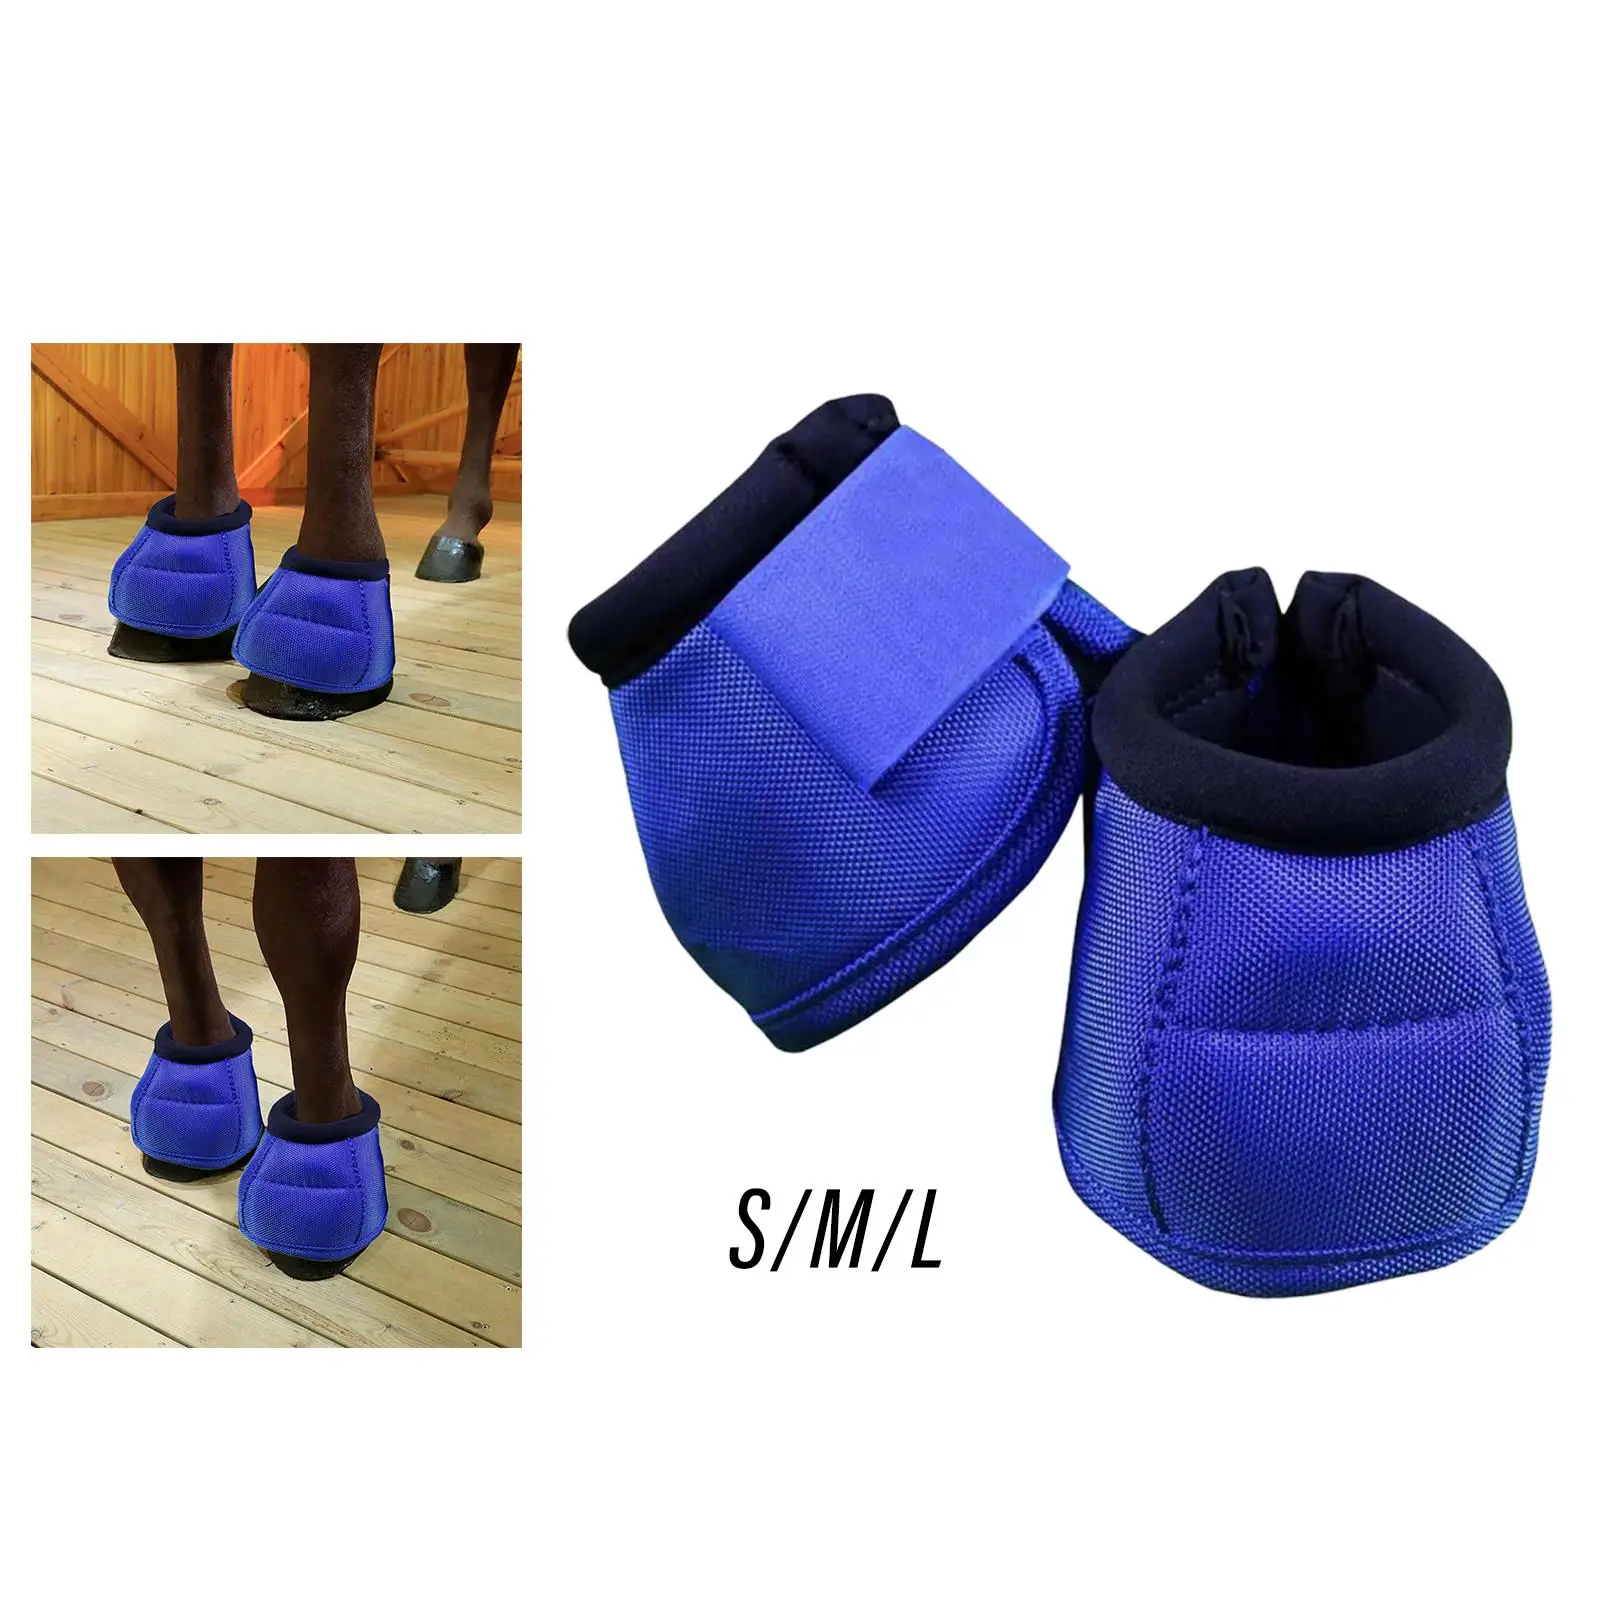 Comfortable 1 Pair Horses Bell Boots with Closure Overreach Boots for Sports Horses